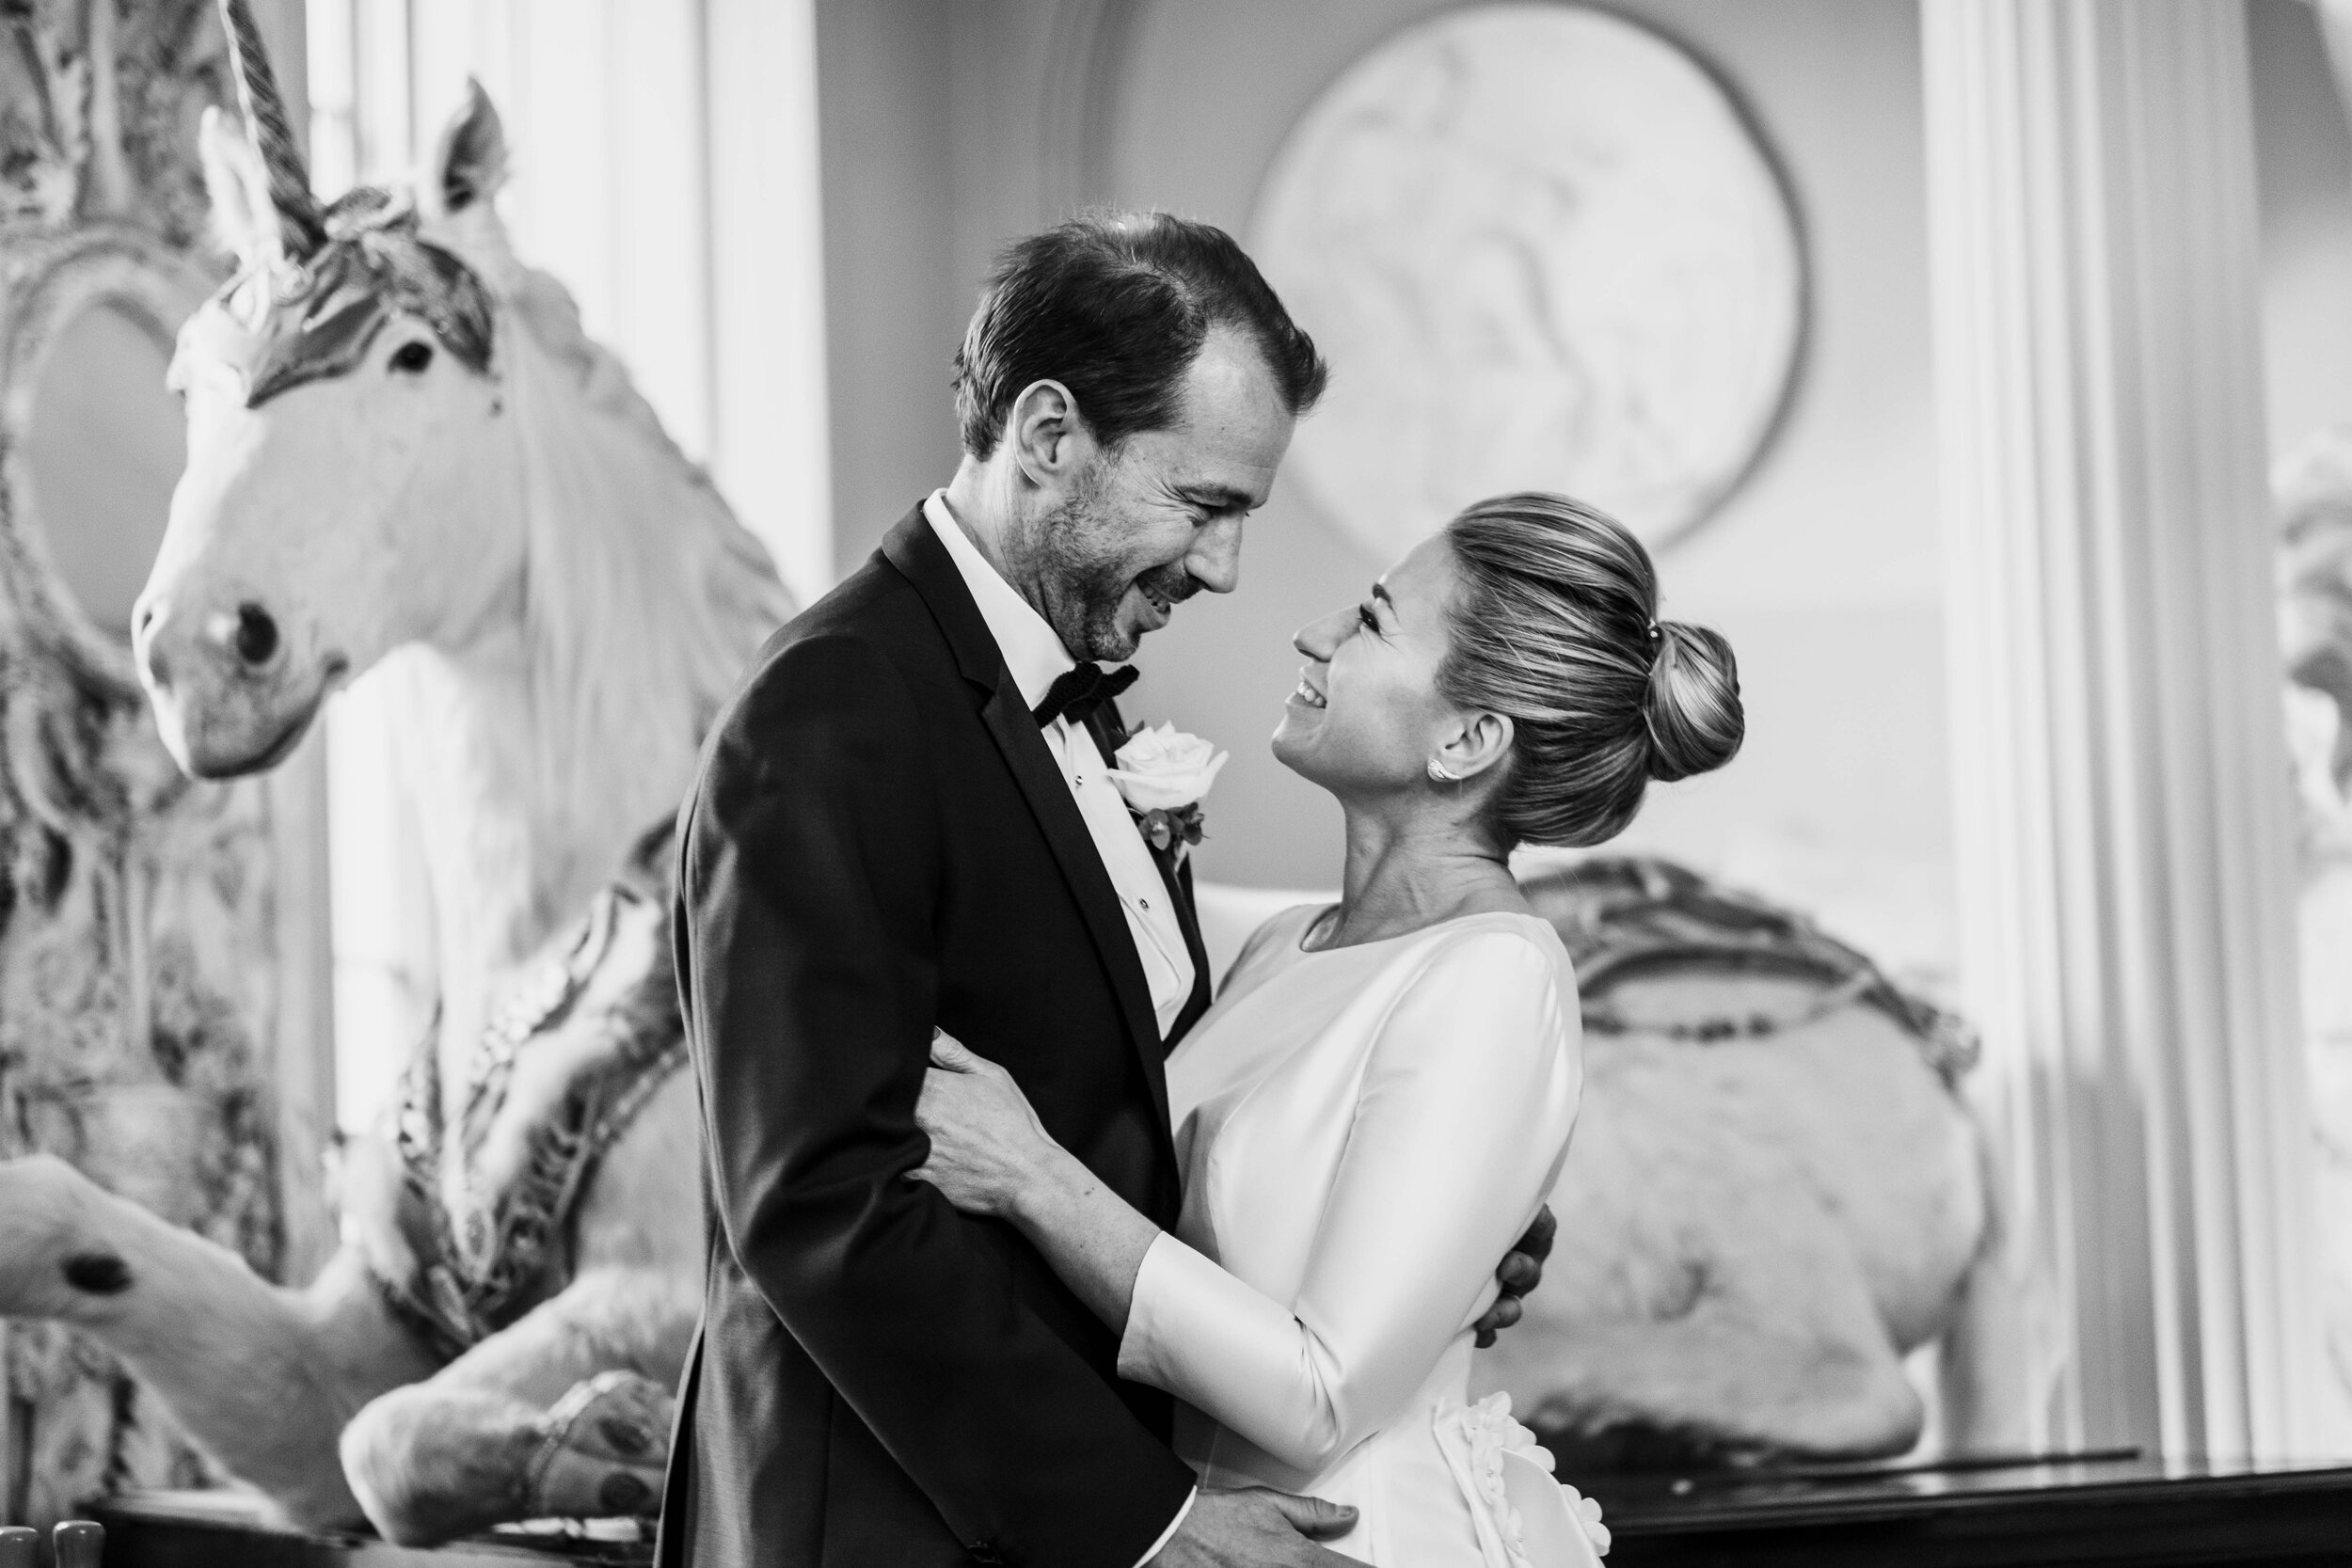 Aynhoe Park wedding photographer bride and groom in front of taxidermy unicorn